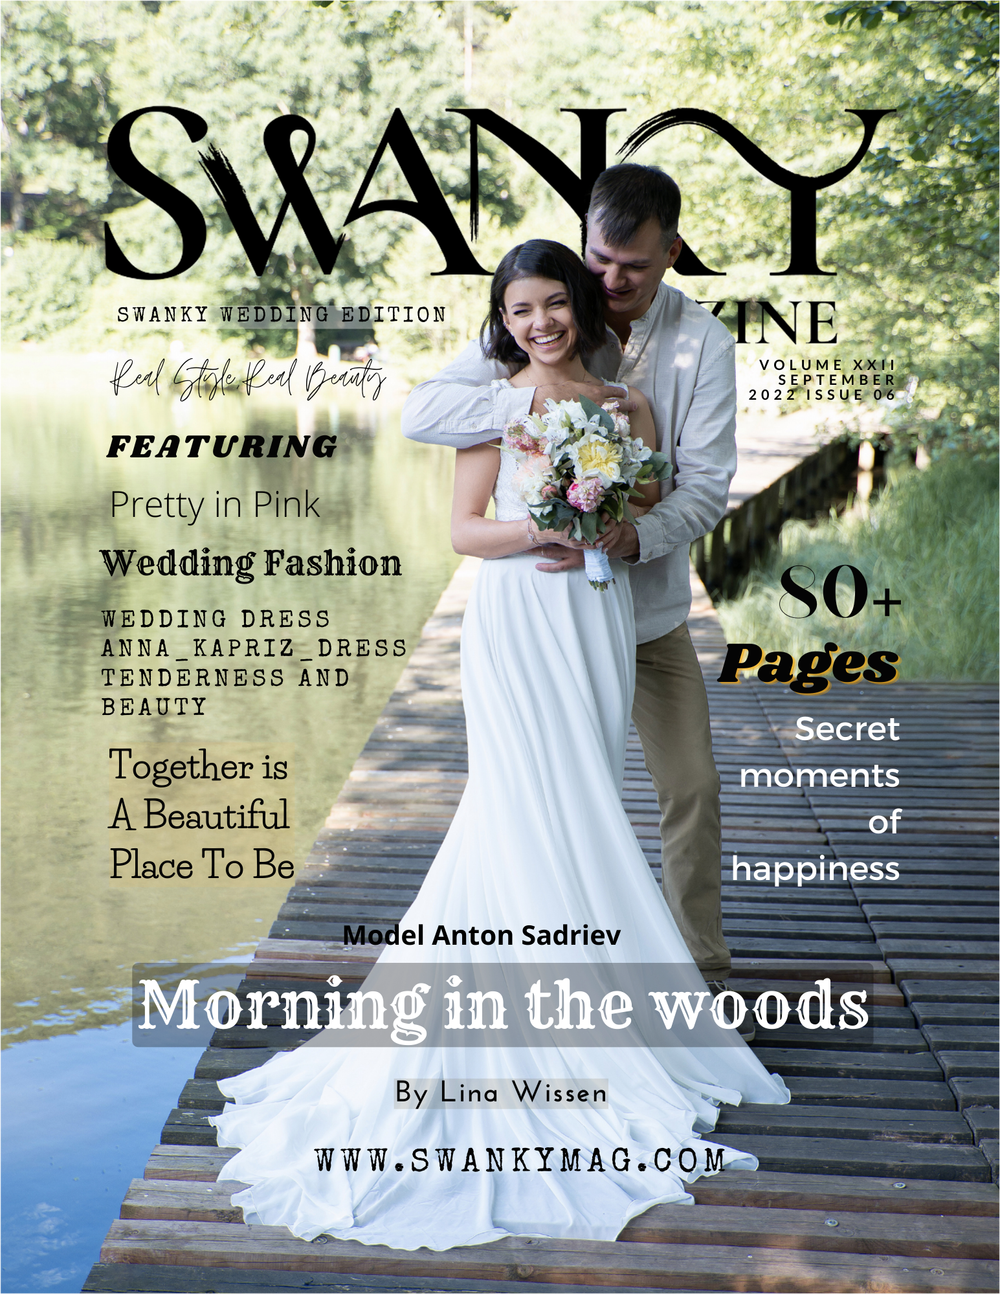 Swanky Wedding Edition September VOL XXII Issue 06 - PRINT ISSUE